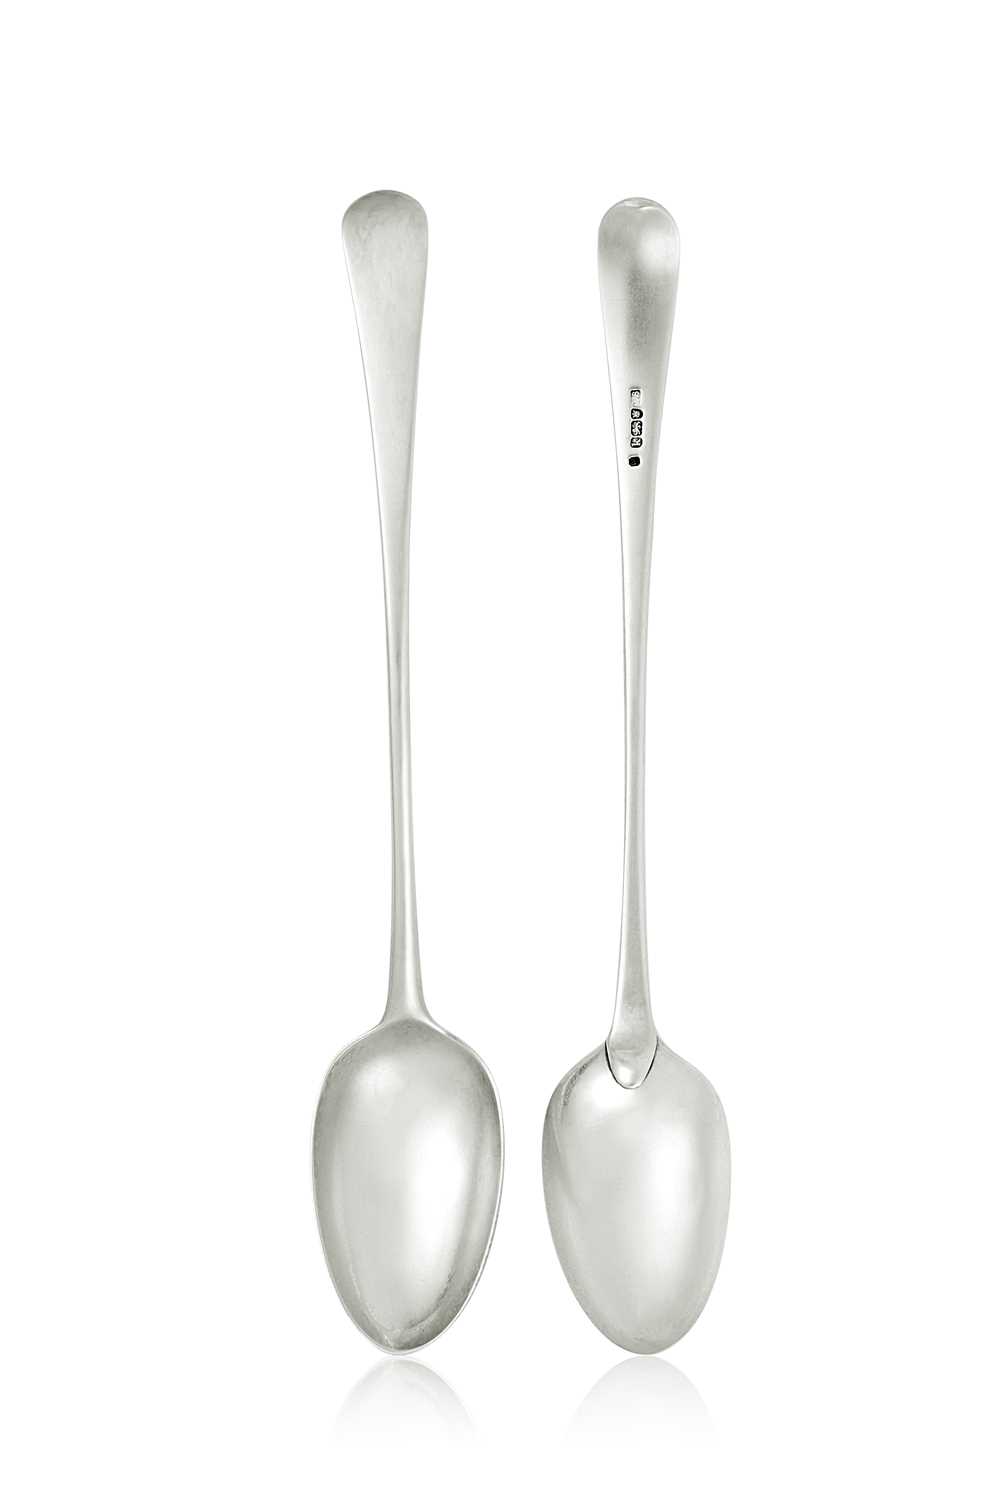 Lot 2043 - A Pair of George III Silver Basting-Spoons